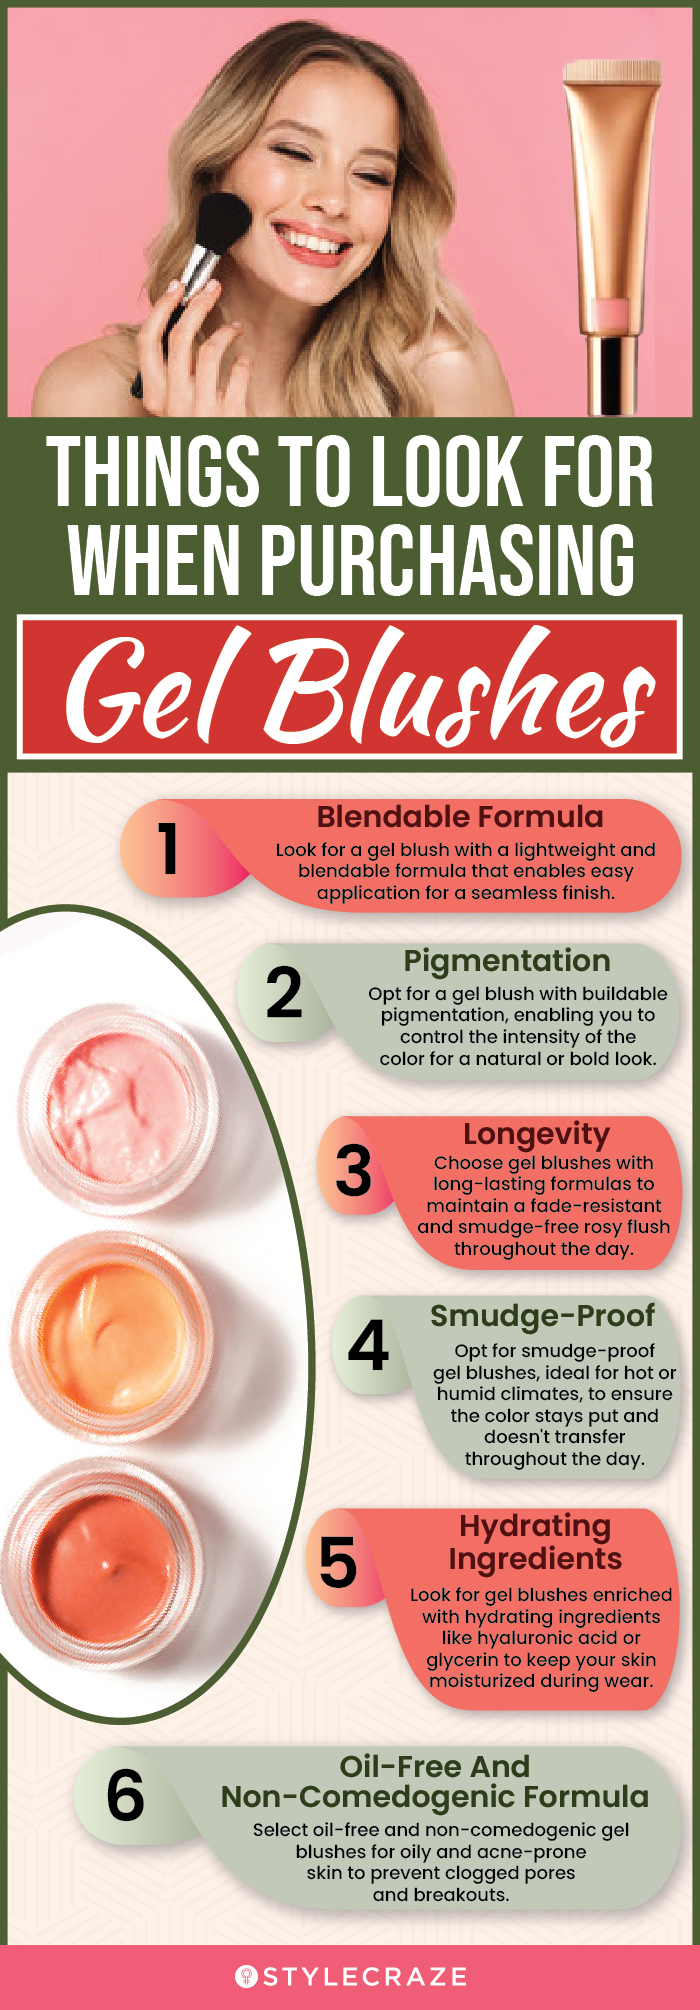 Things To Look For When Purchasing Gel Blushes (infographic)